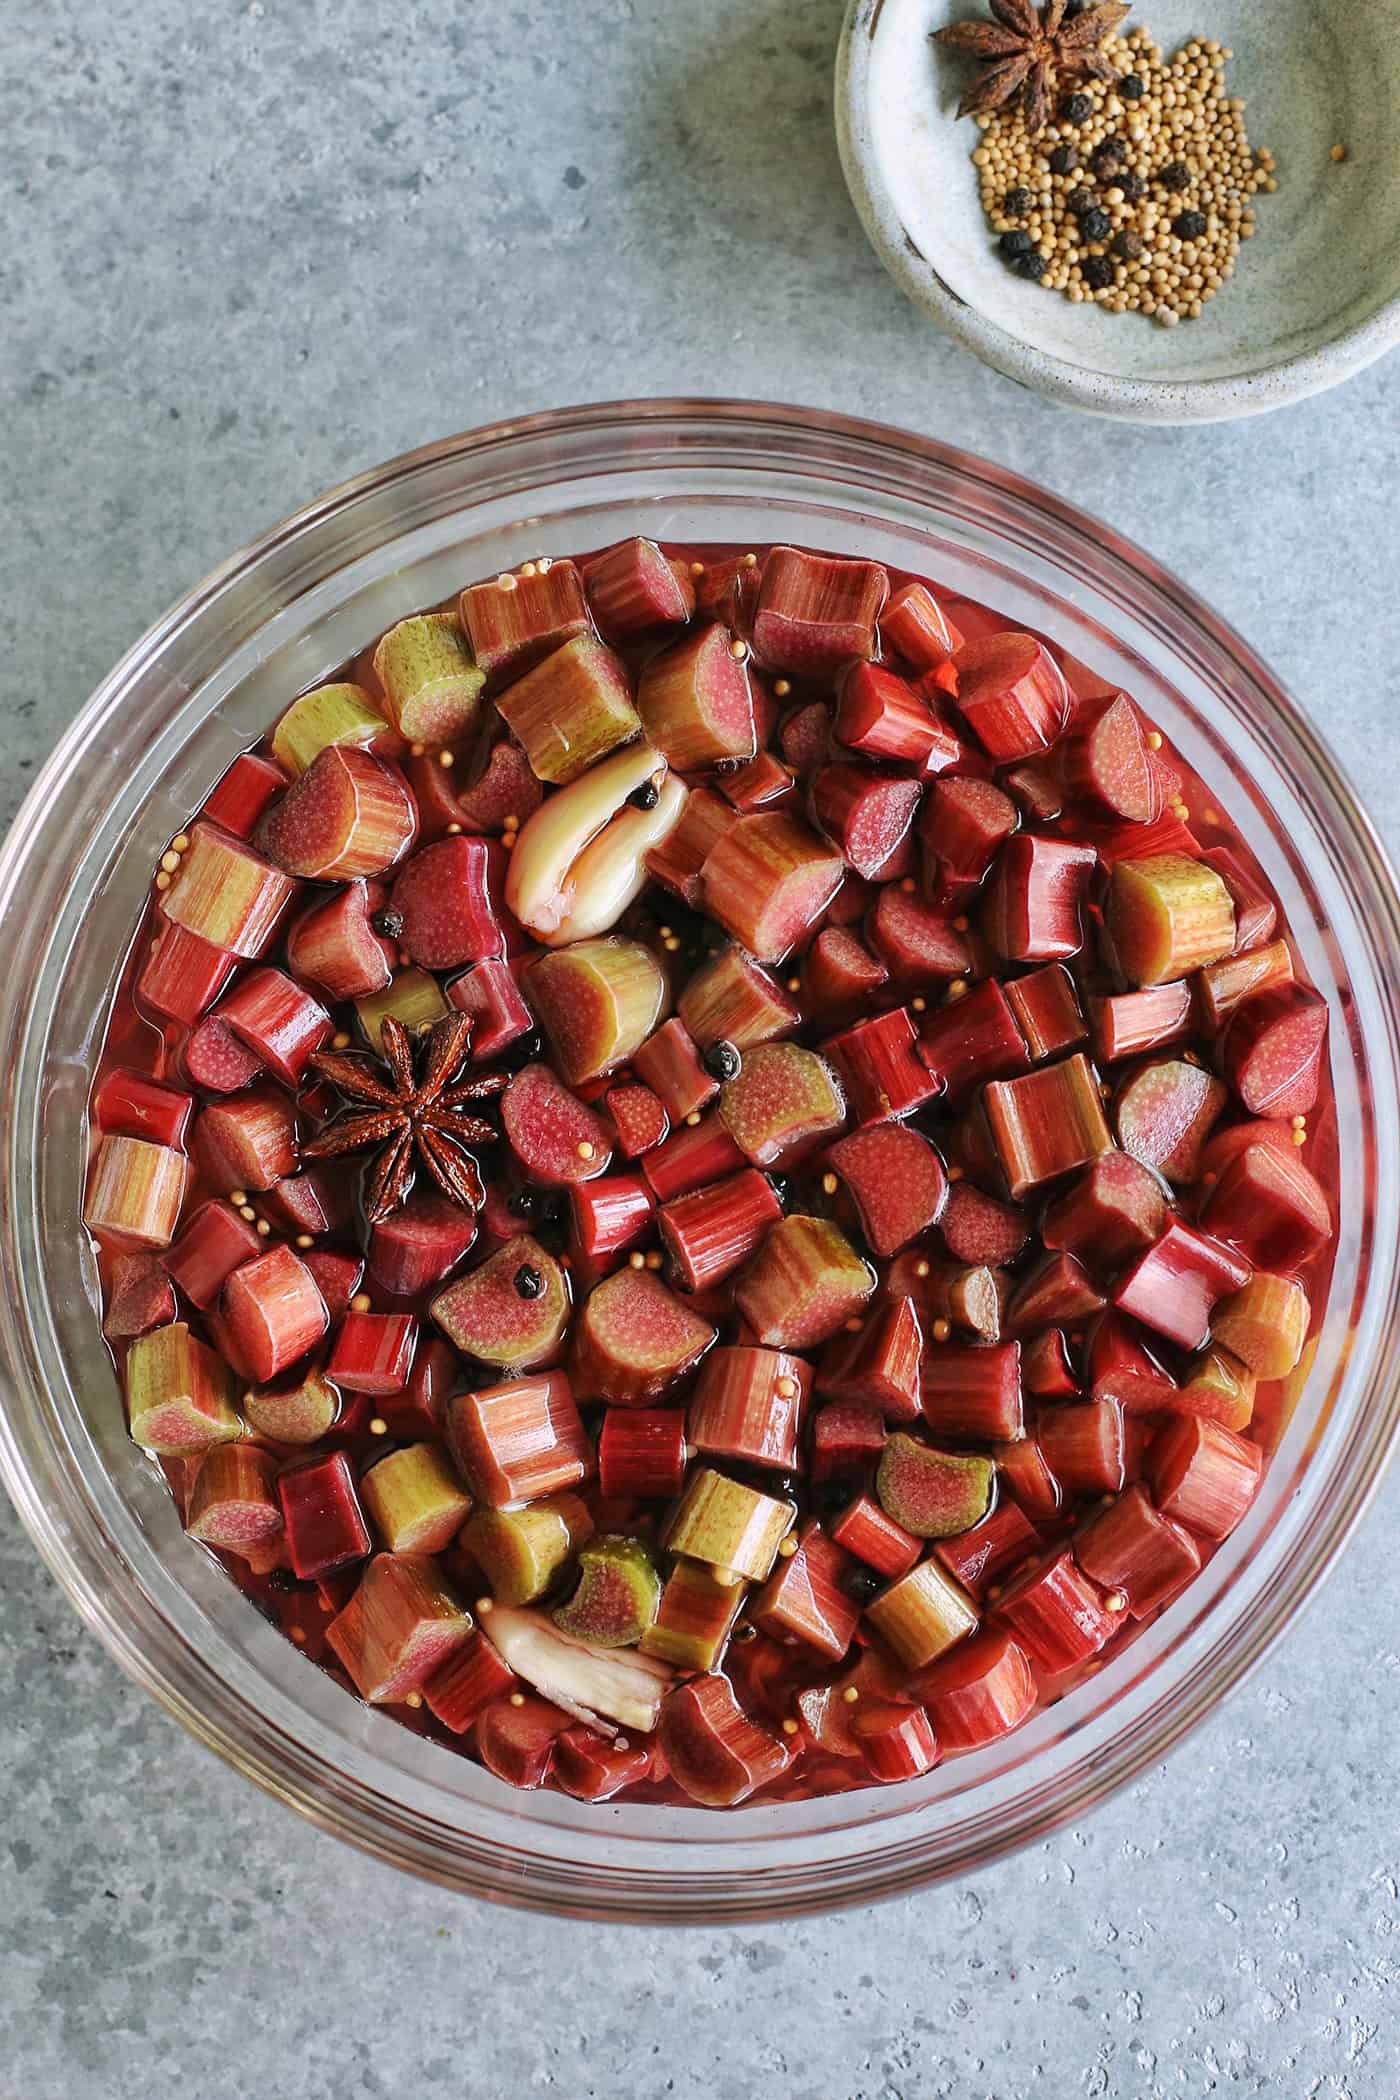 Overhead view of a jar of pickled rhubarb